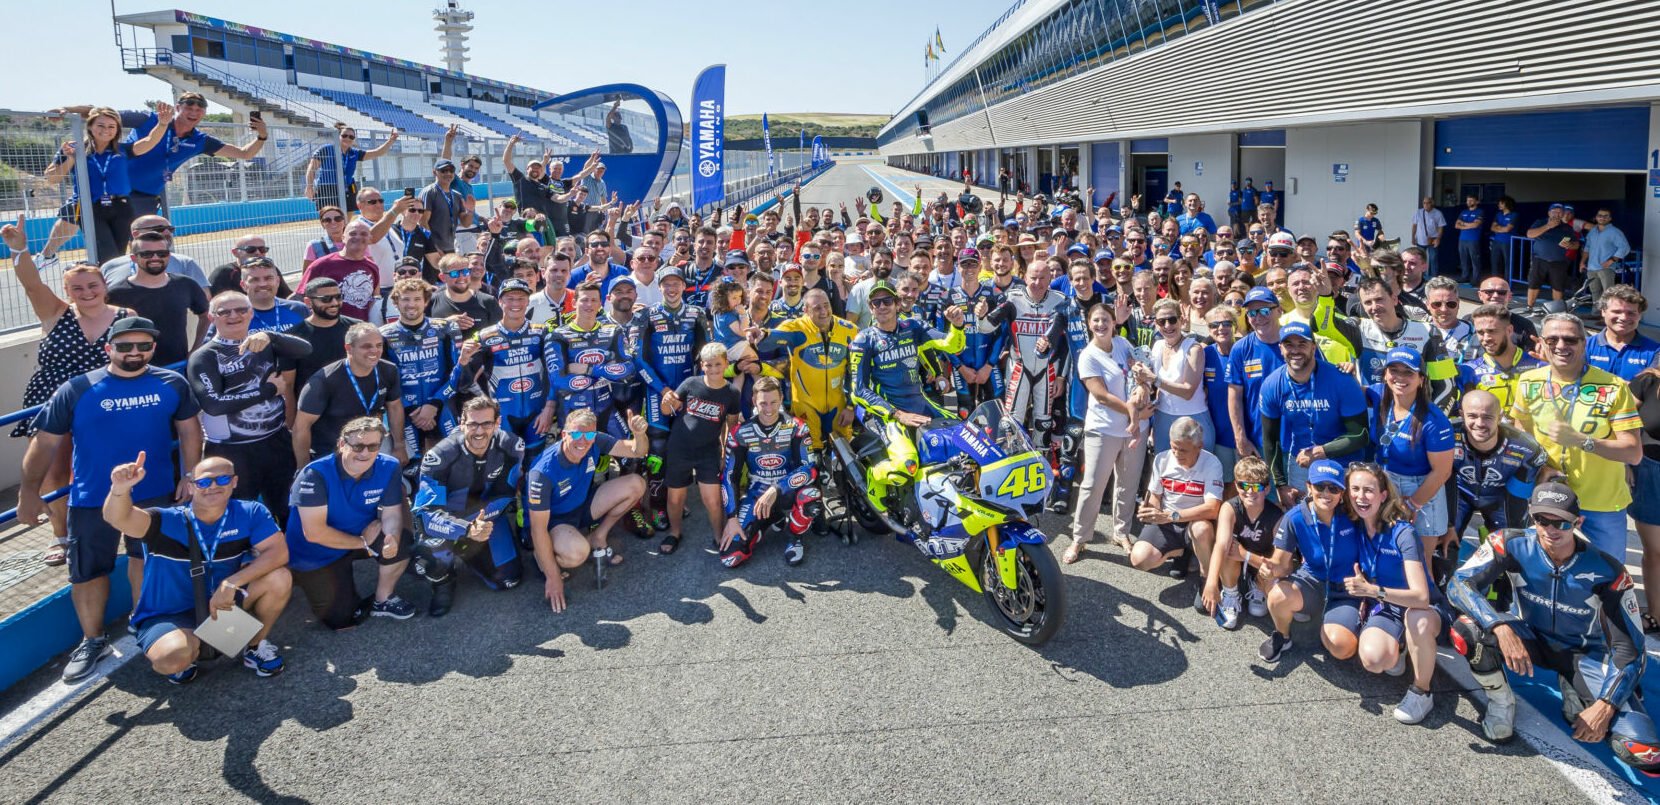 Lucky Yamaha owners got to do a special Yamaha Racing Experience track day at Jerez with Yamaha racing stars, including Valentino Rossi (front and center). Photo courtesy Yamaha.